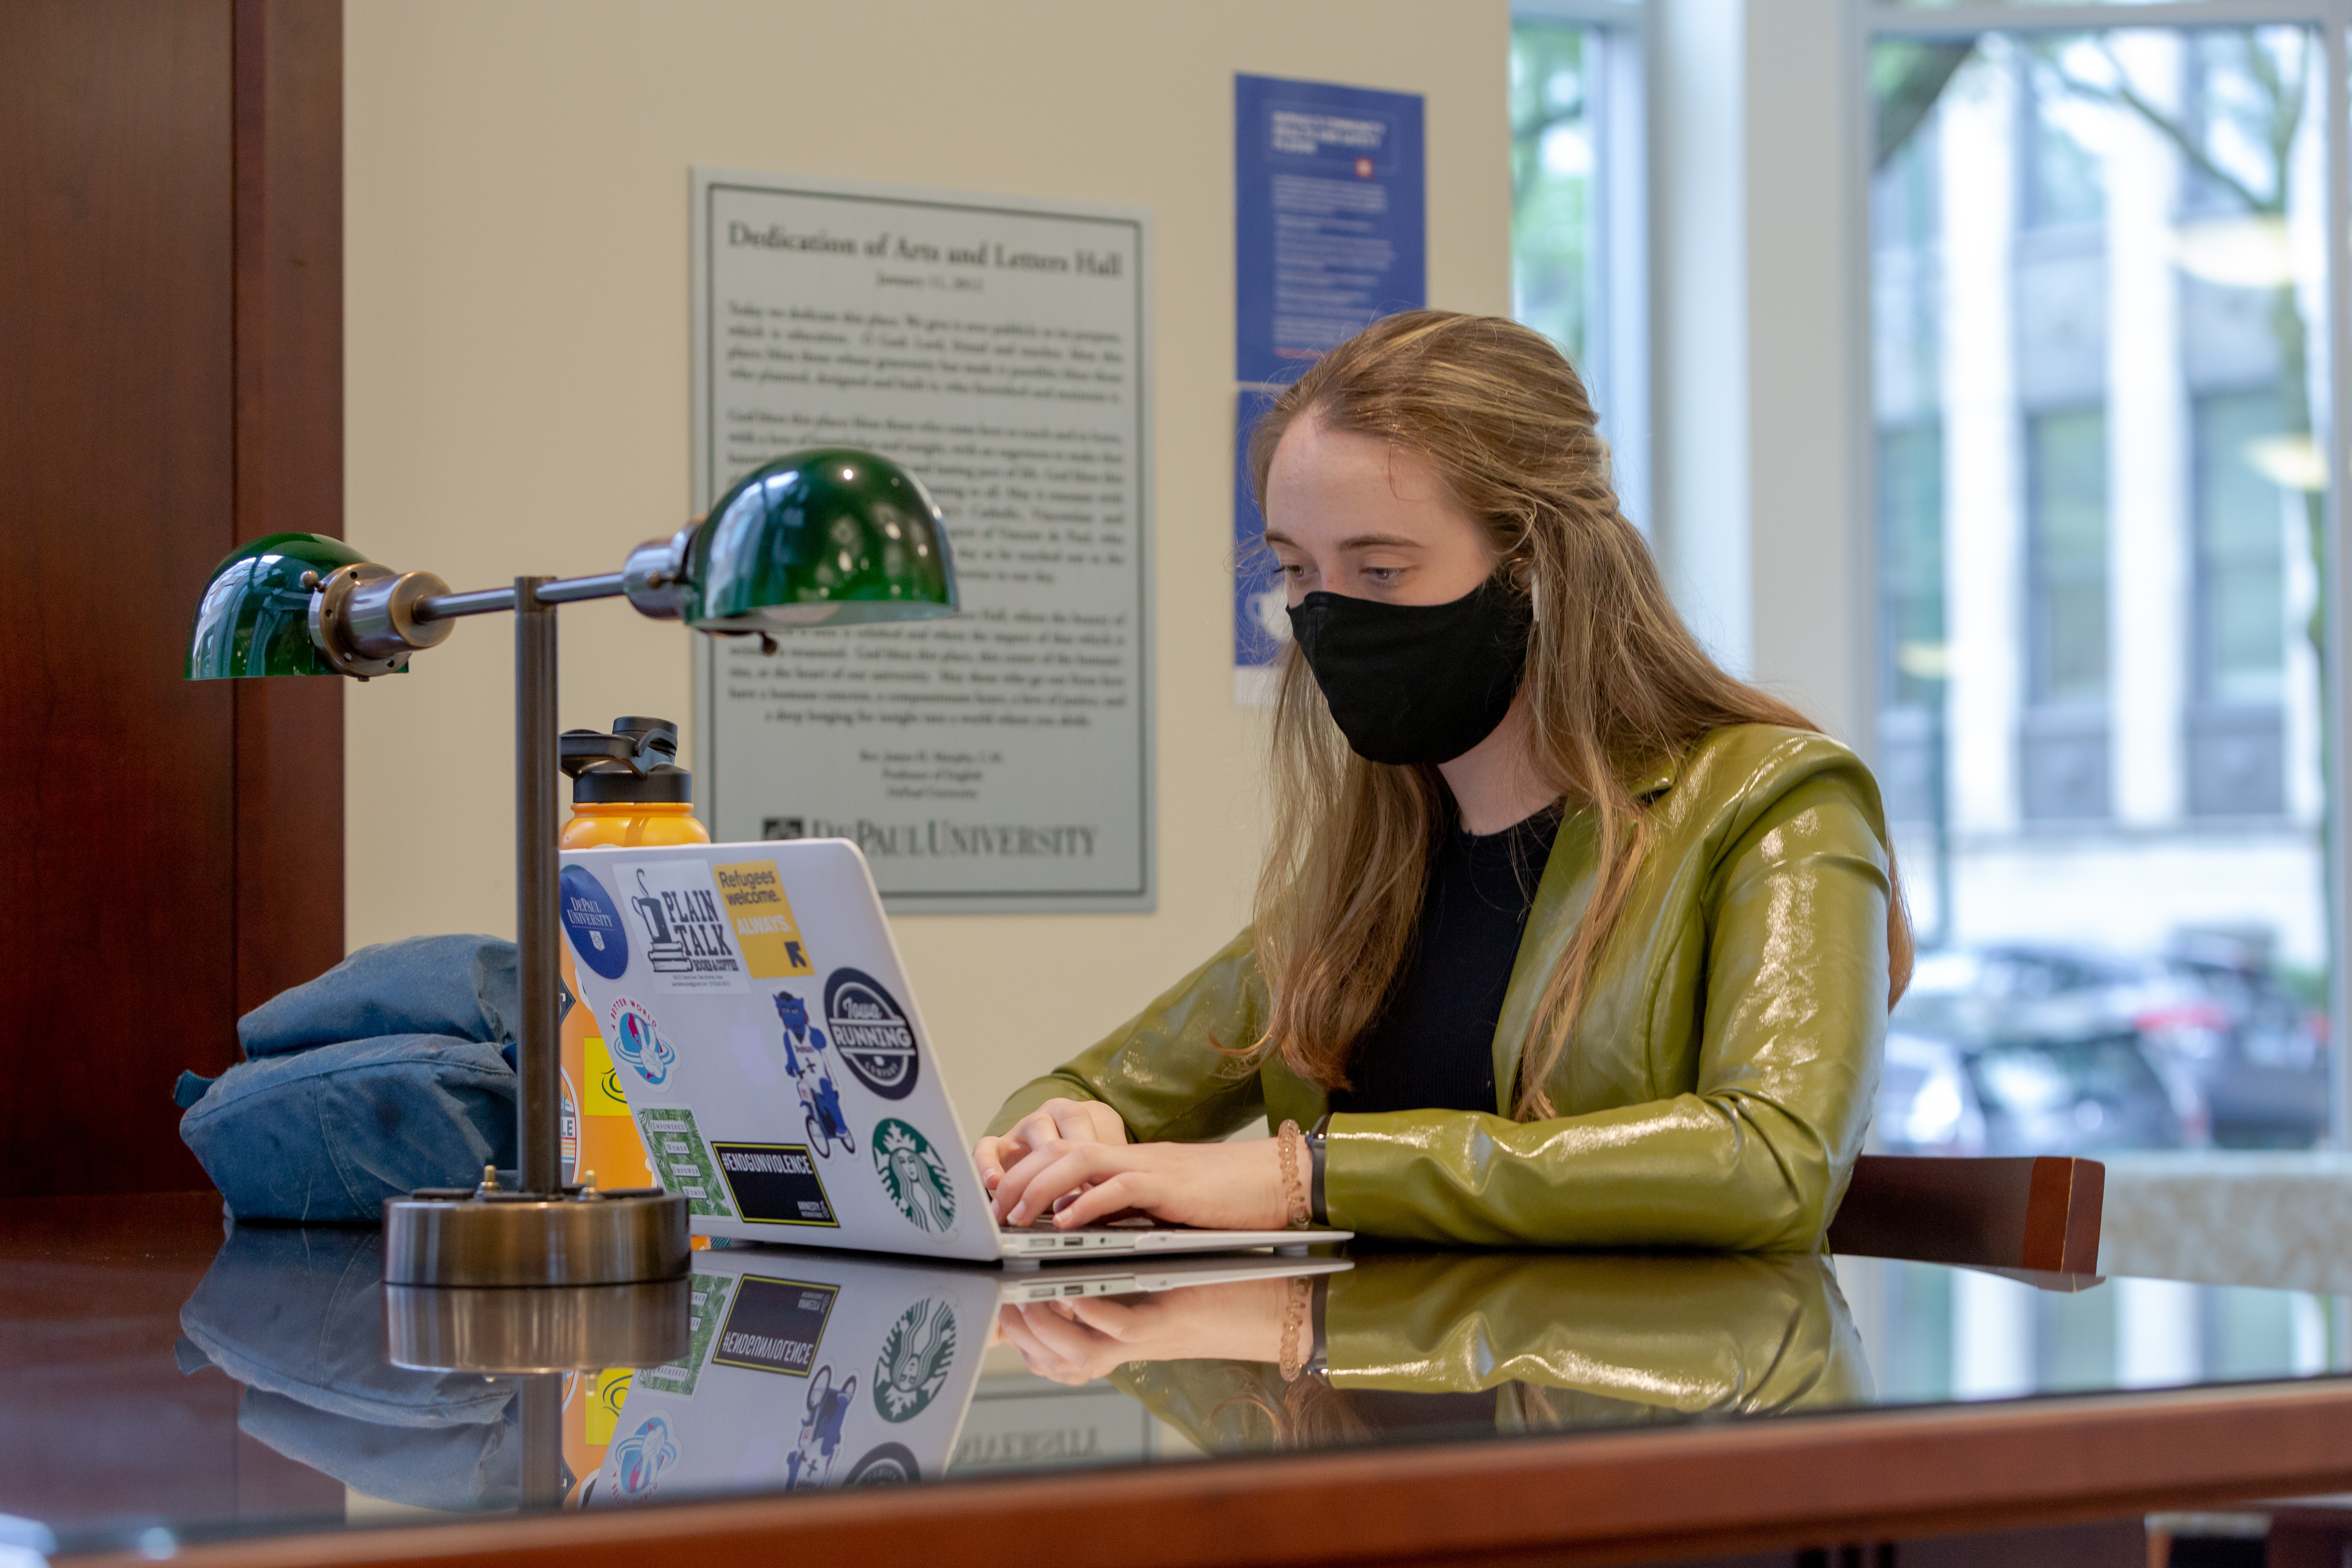 Female student wearing a mask on a laptop